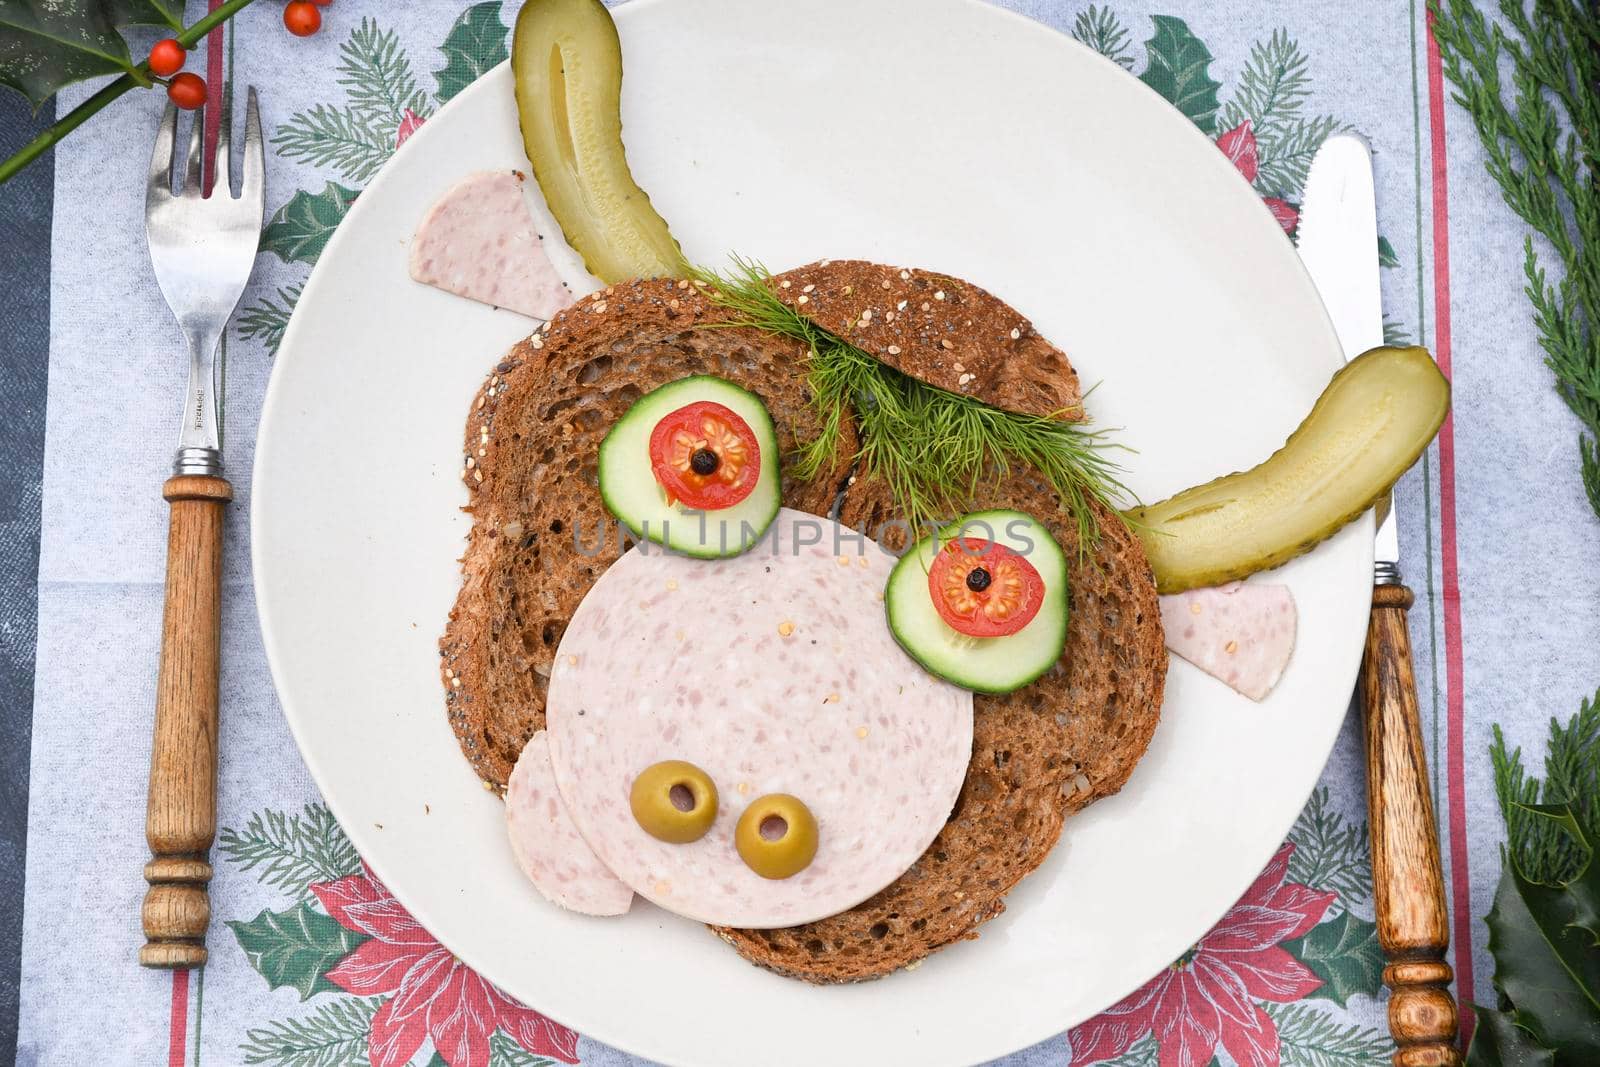 Sandwich in the form of a portrait of a cheerful bull made of dark bread, sausages and vegetables on a plate, on a dark background with a decor of thuja and holly branches